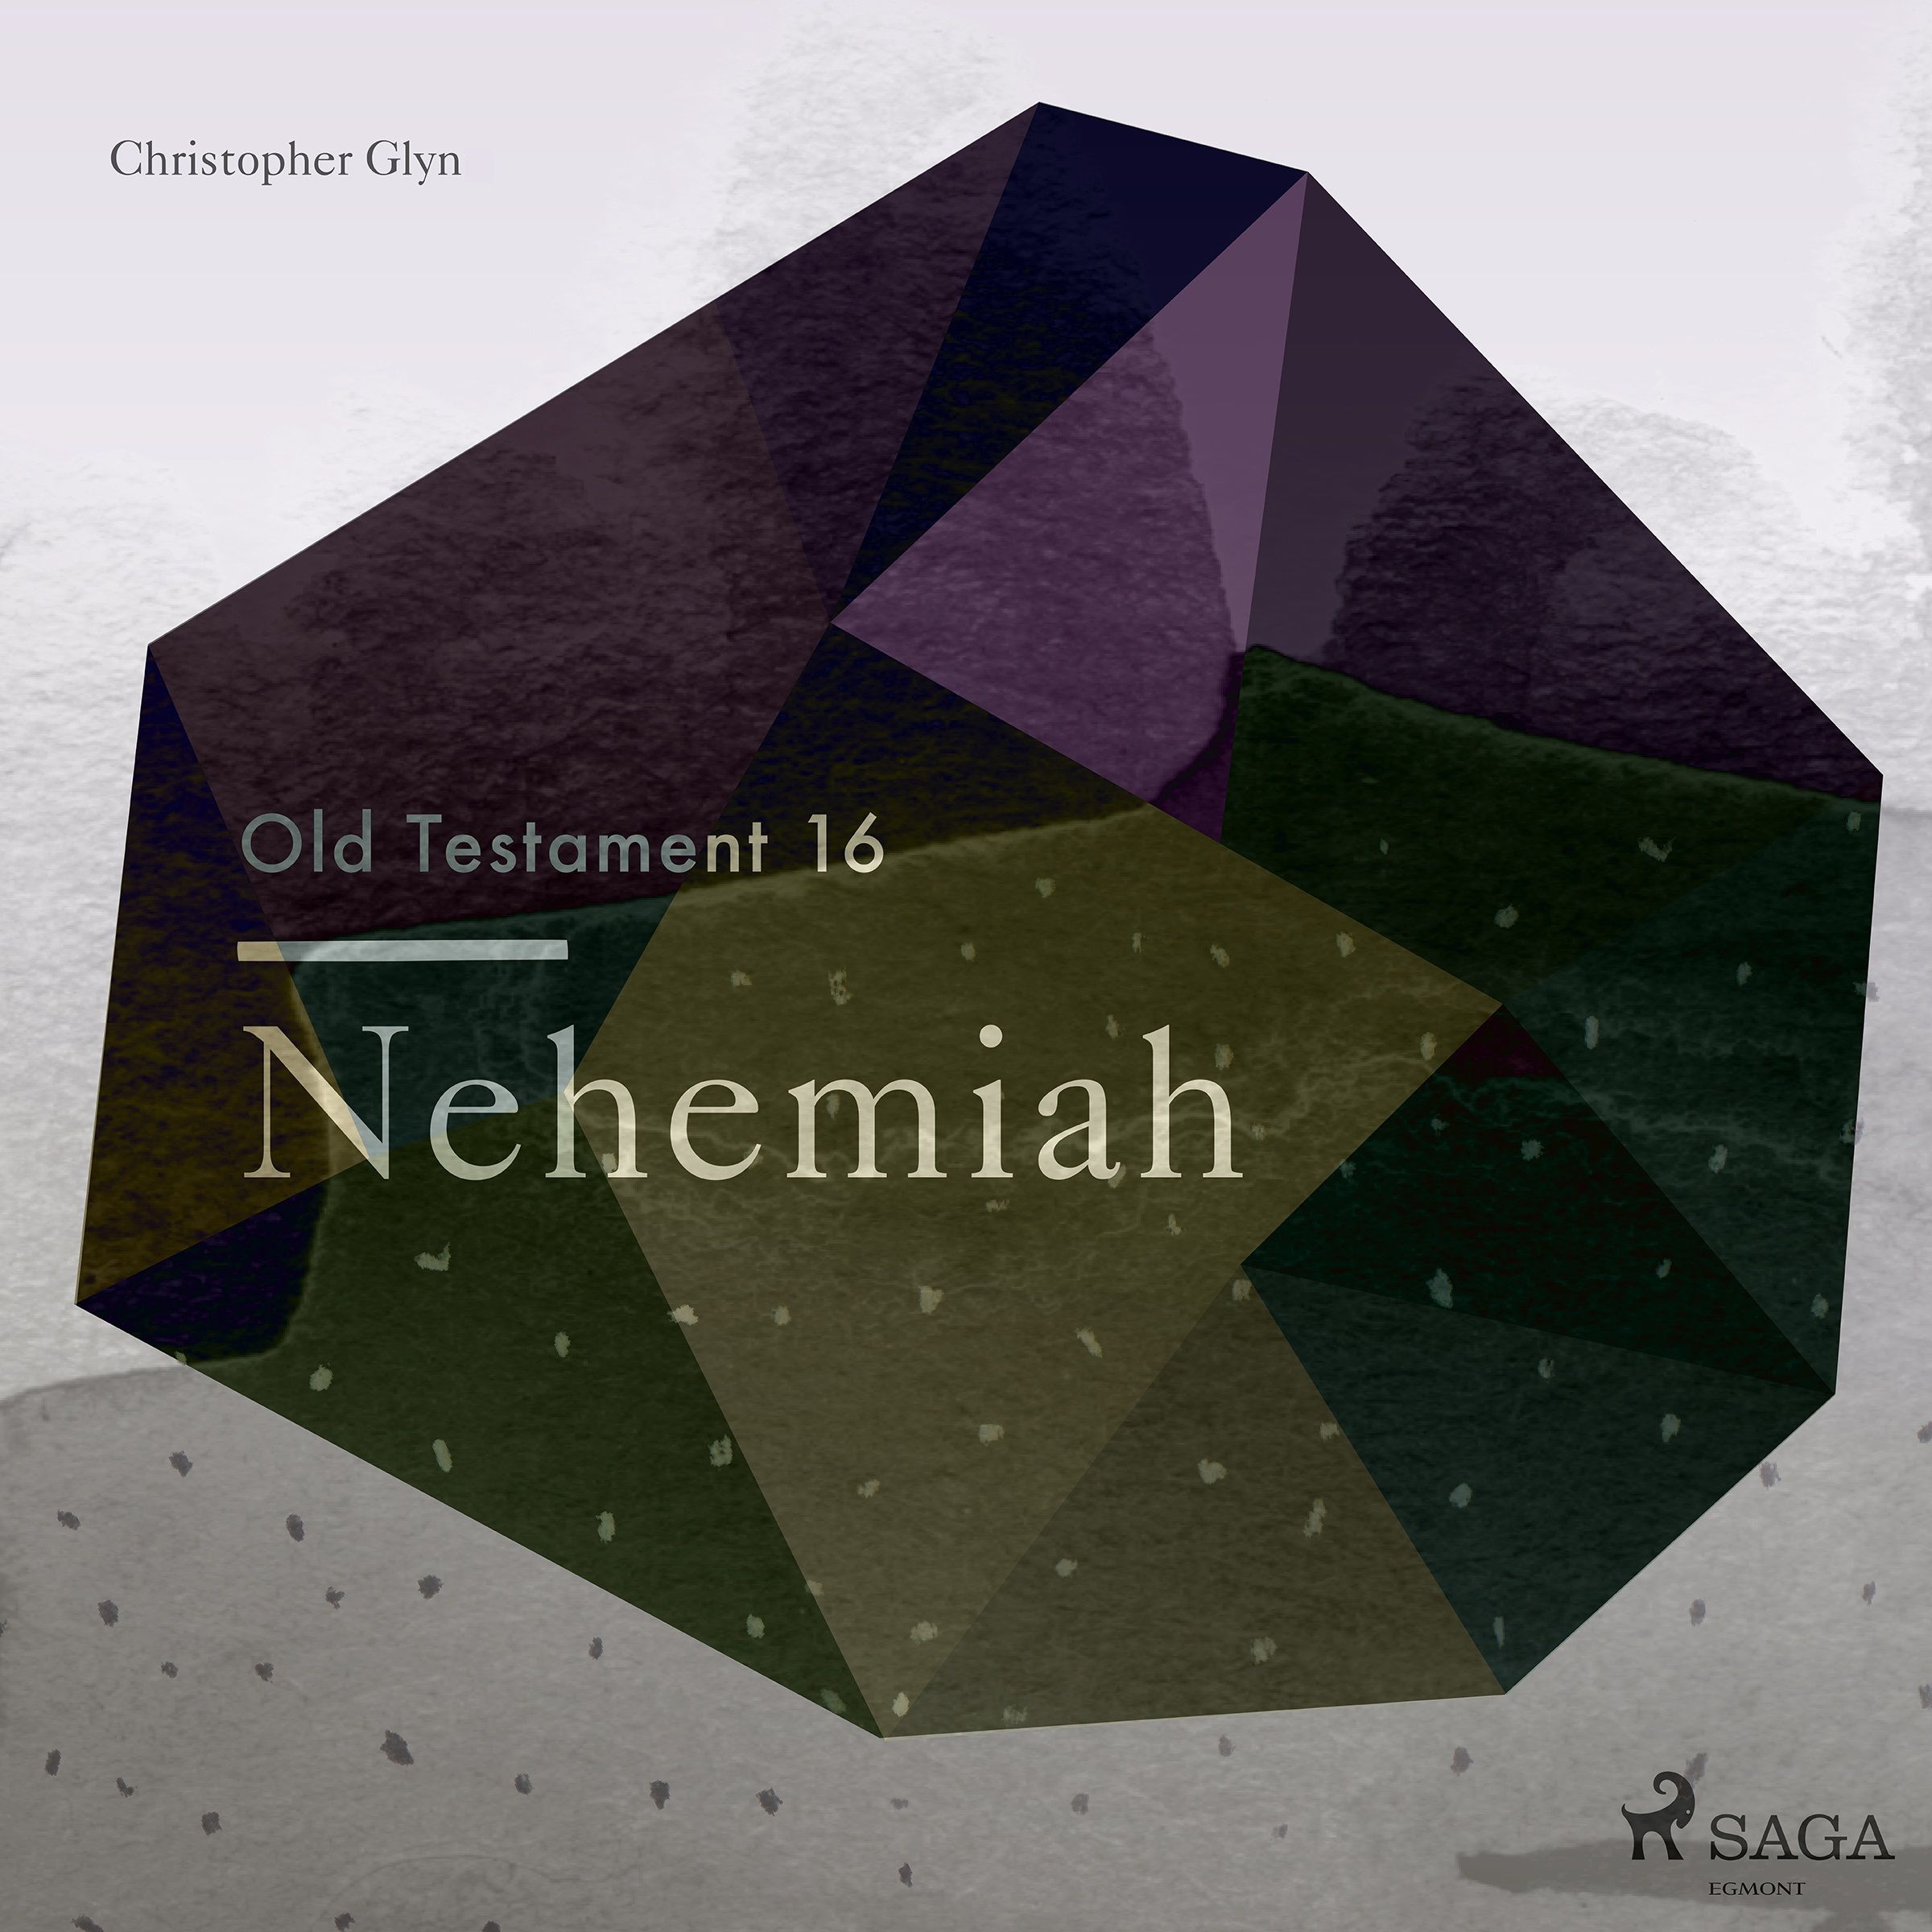 The Old Testament 16 - Nehemiah, audiobook by Christopher Glyn